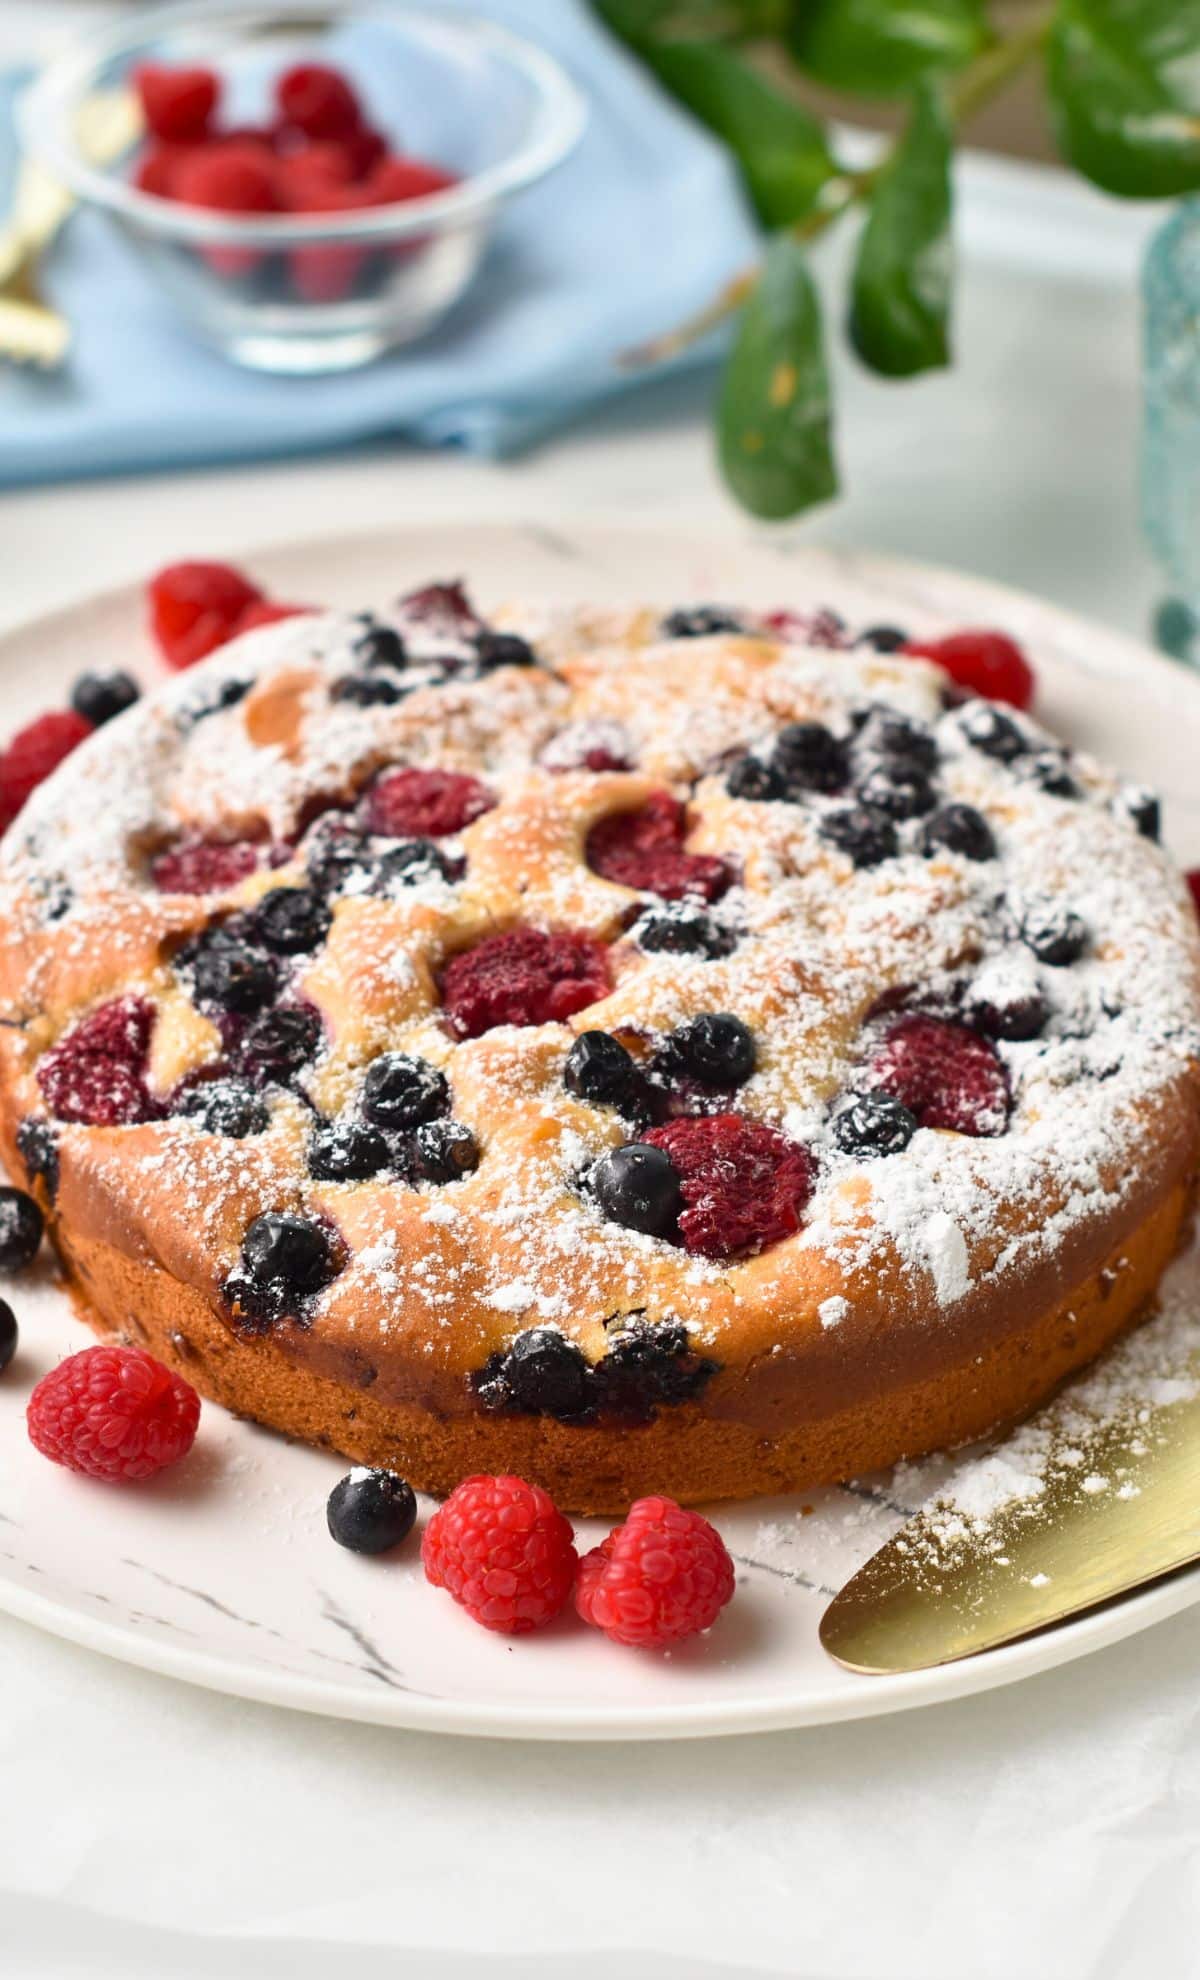 Yogurt Berry Cake decorated with fresh berries on a plate.